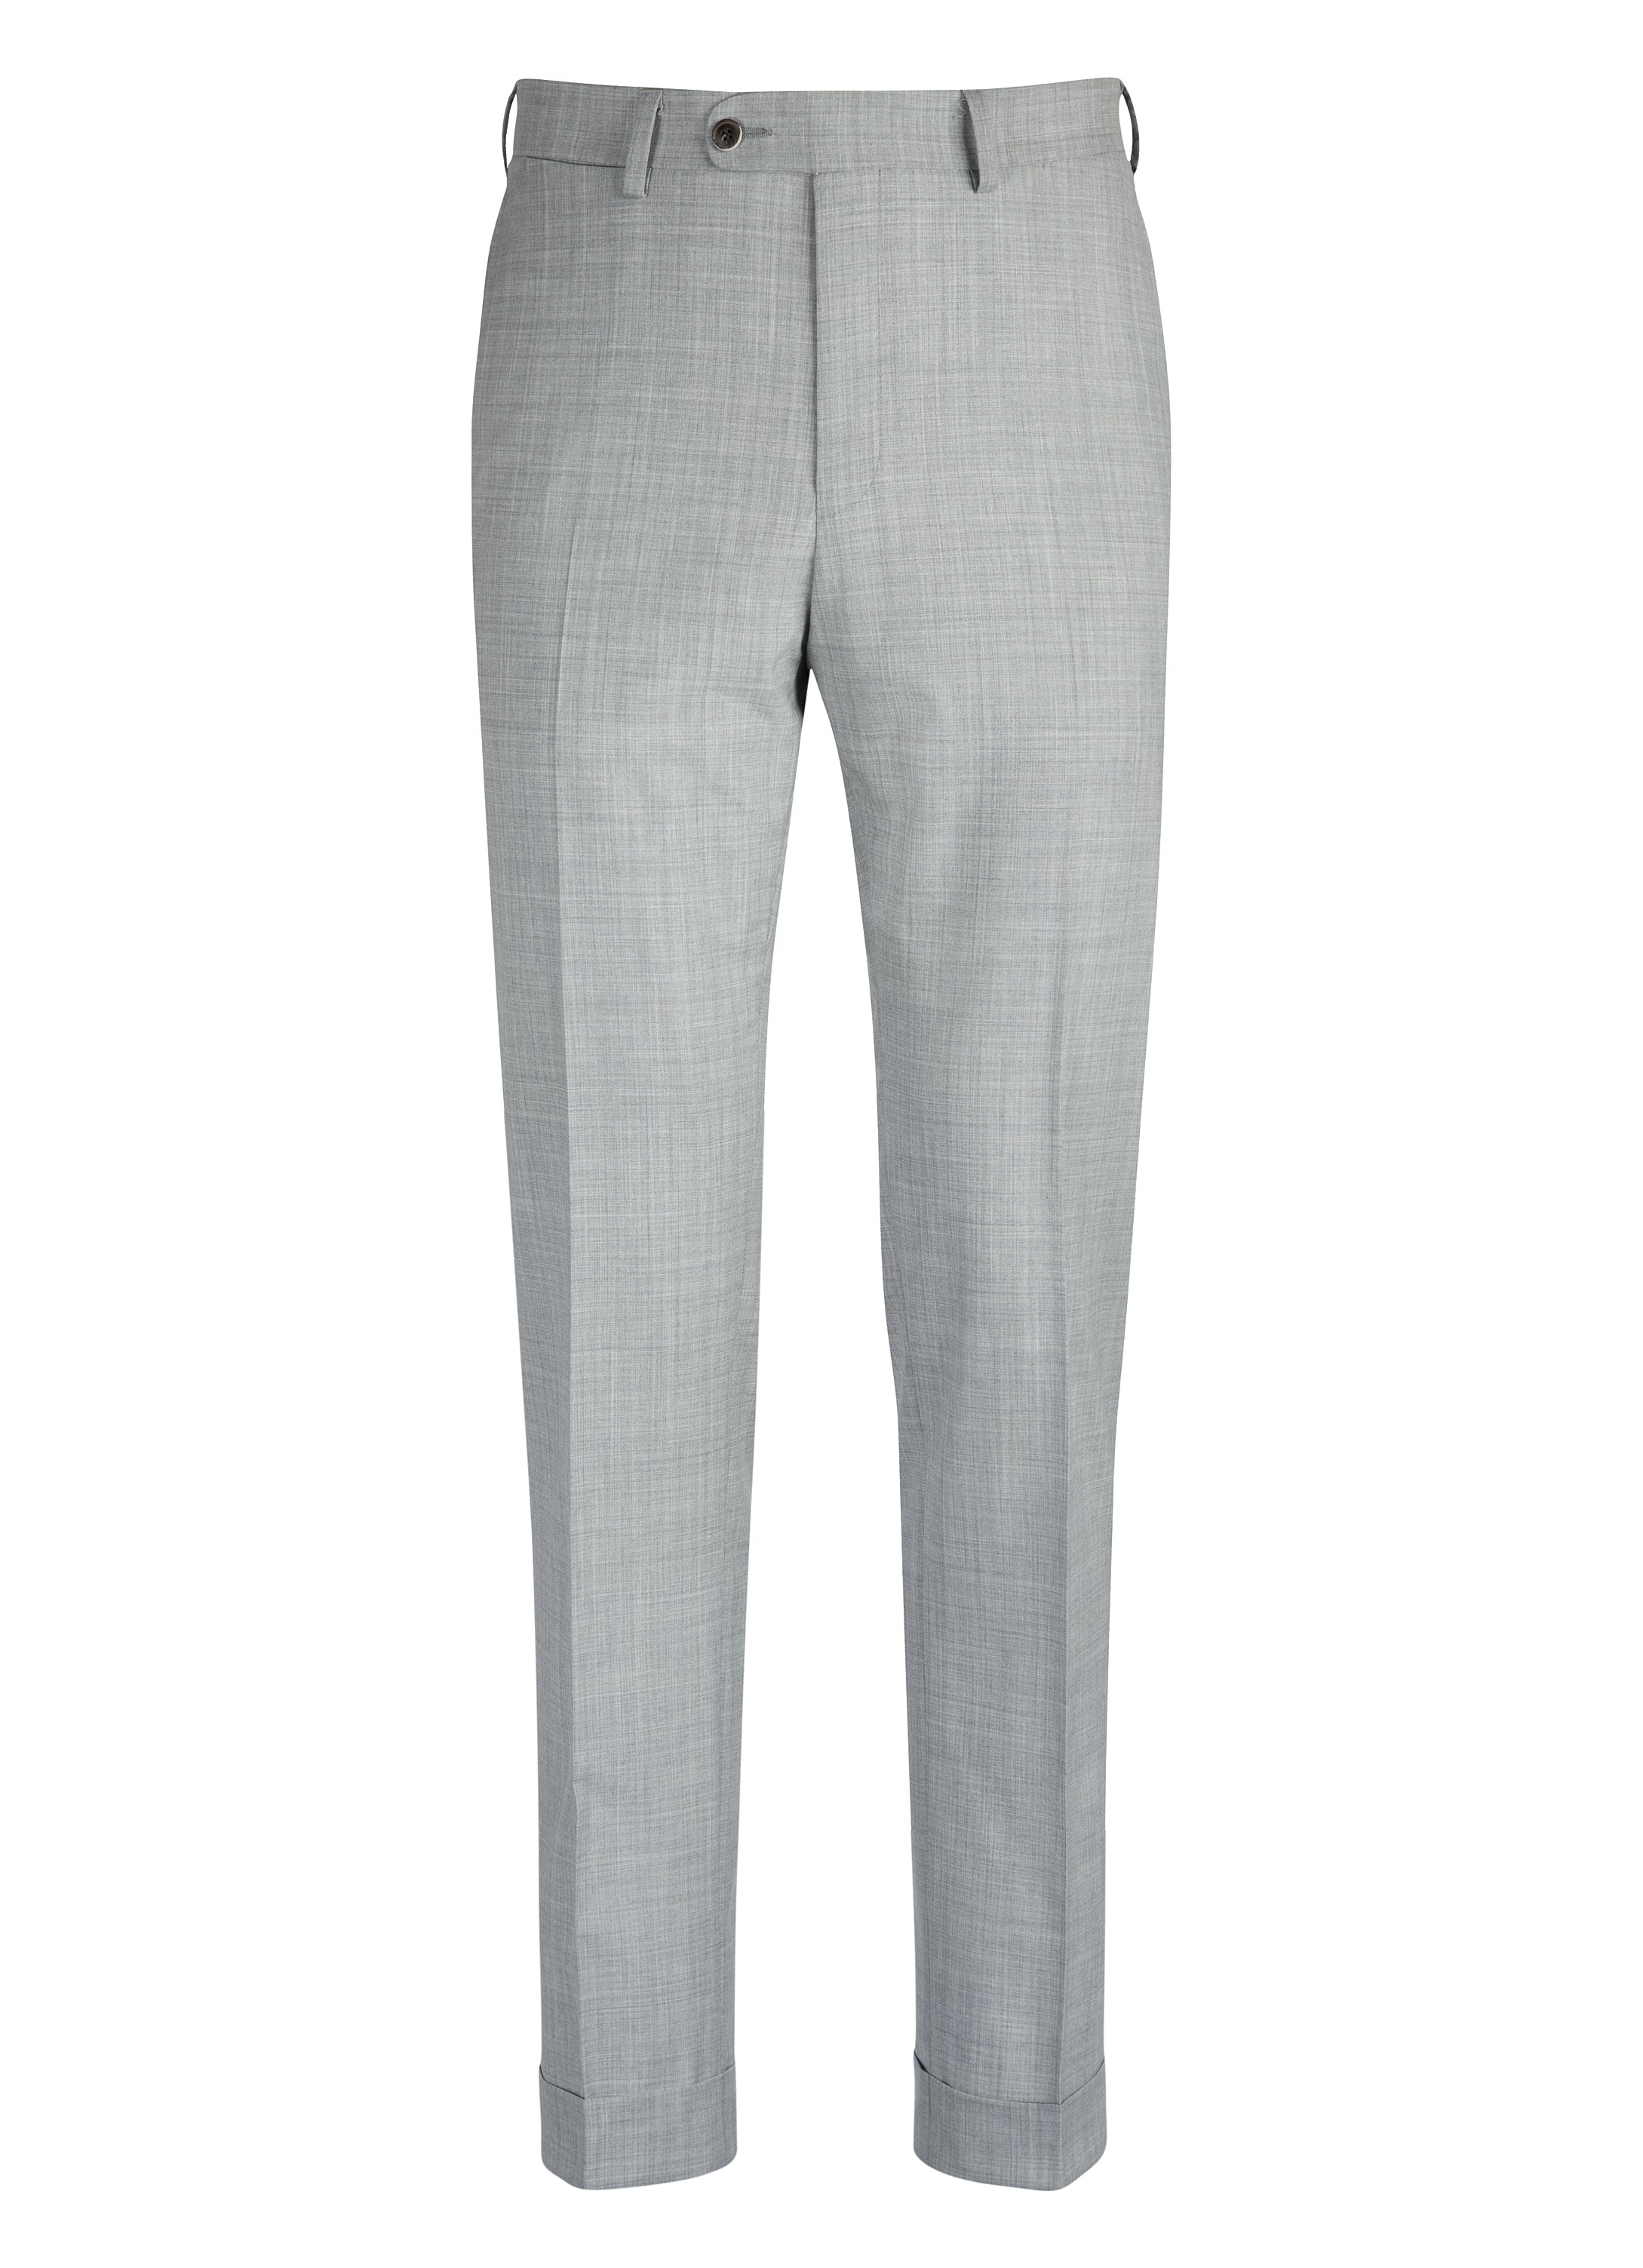 Grey trousers, Trousers, Mens trousers